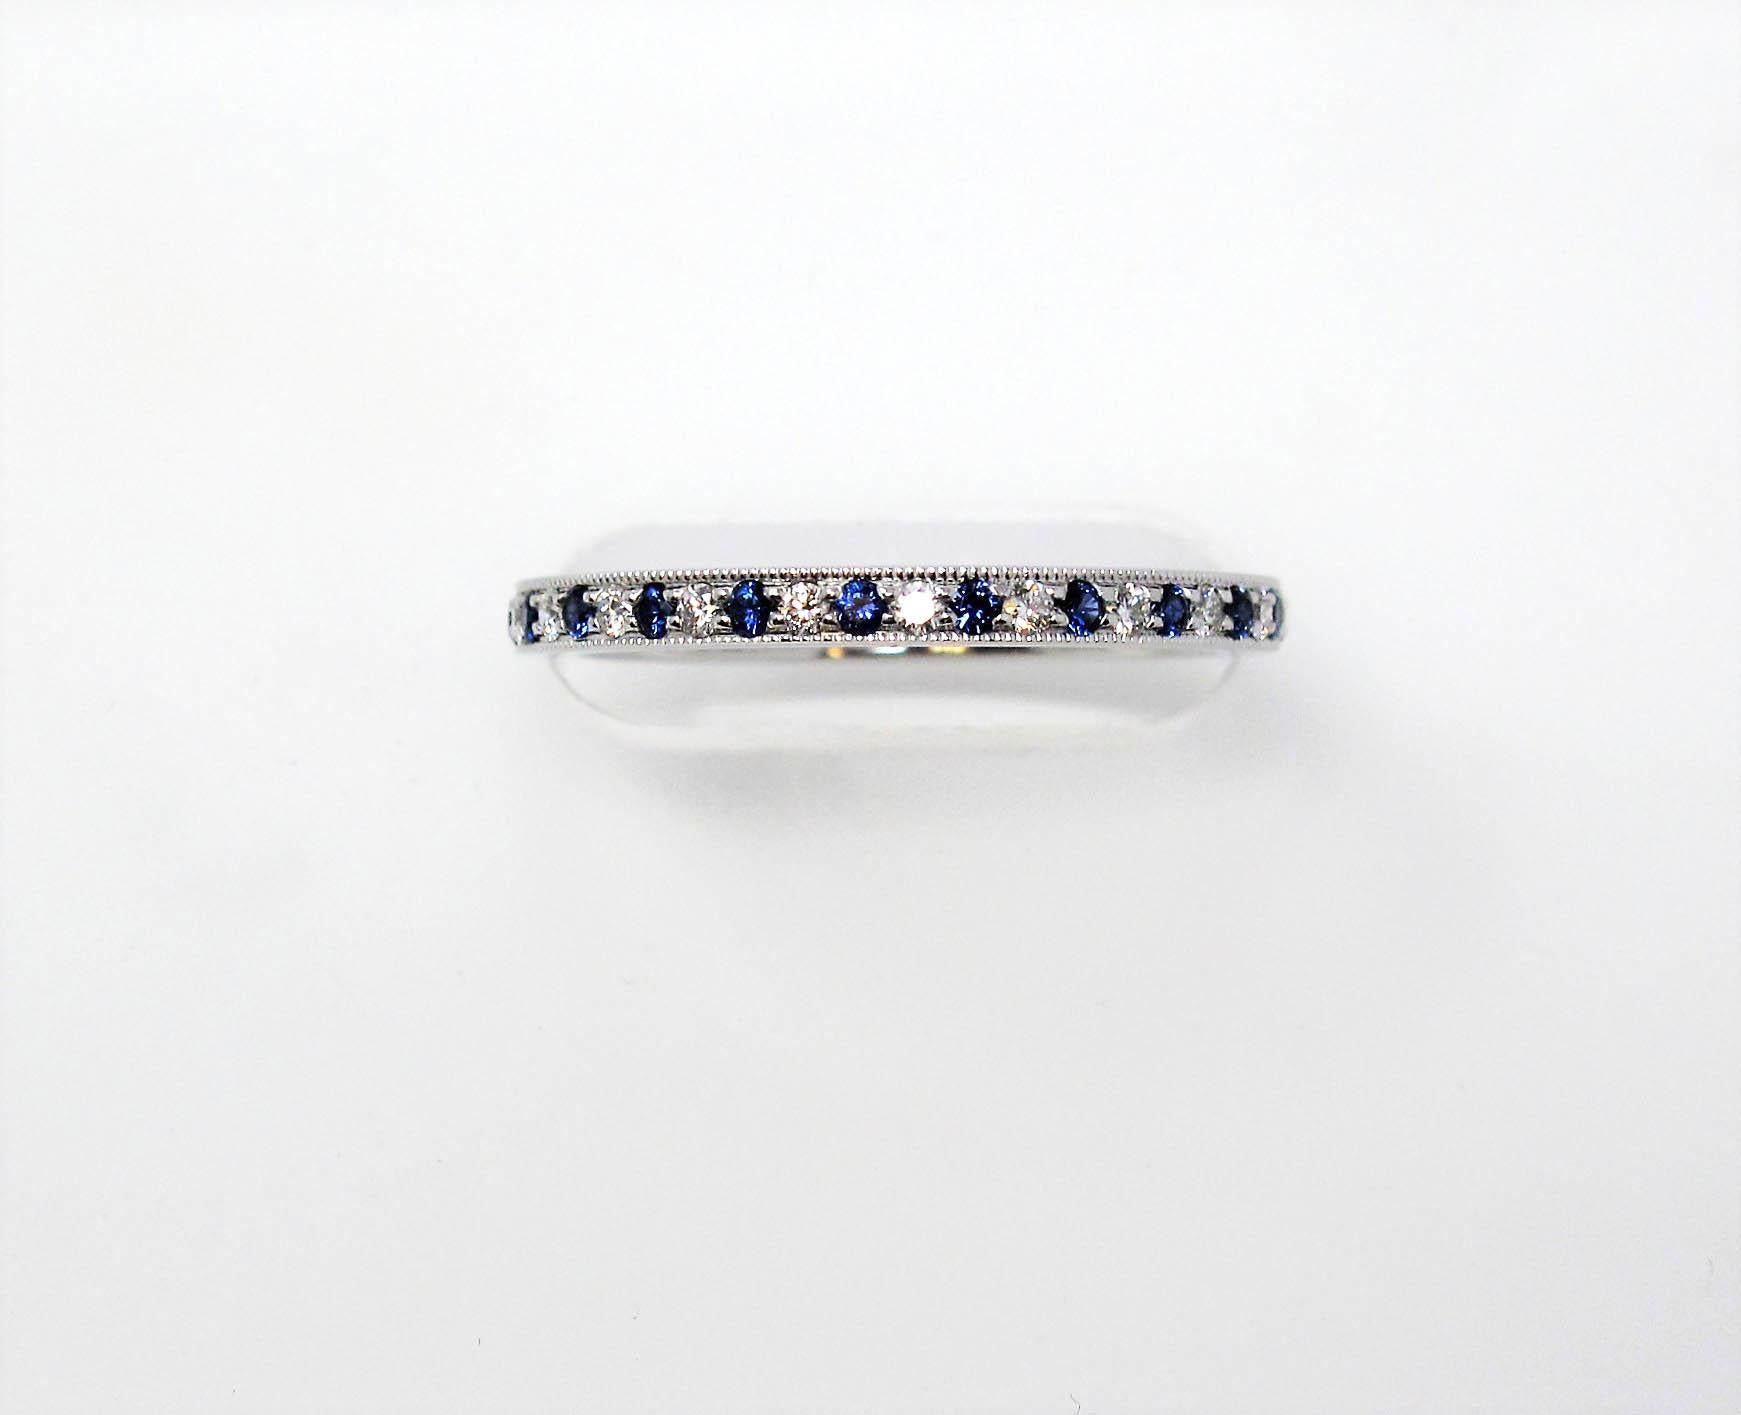 Stunning Tiffany & Co. Legacy Collection sapphire and diamond eternity band ring. This timeless beauty features bright blue sapphires and icy white diamonds bead set in an alternating pattern throughout the piece. The thin, milgrain edged band is